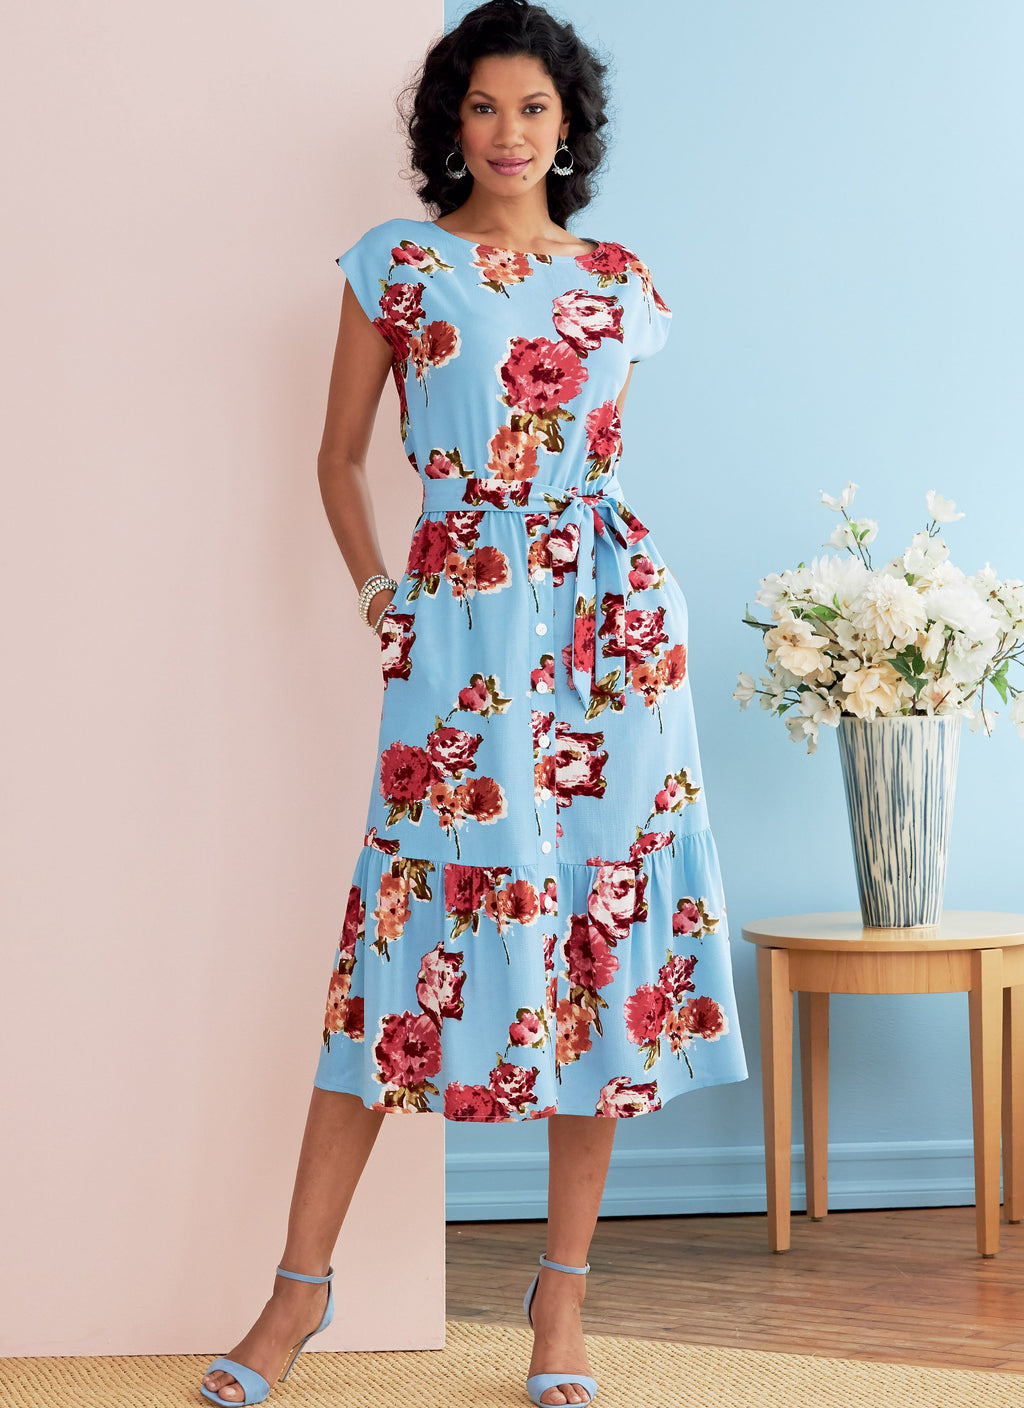 Butterick Sewing Pattern 6722 Misses' Dresses